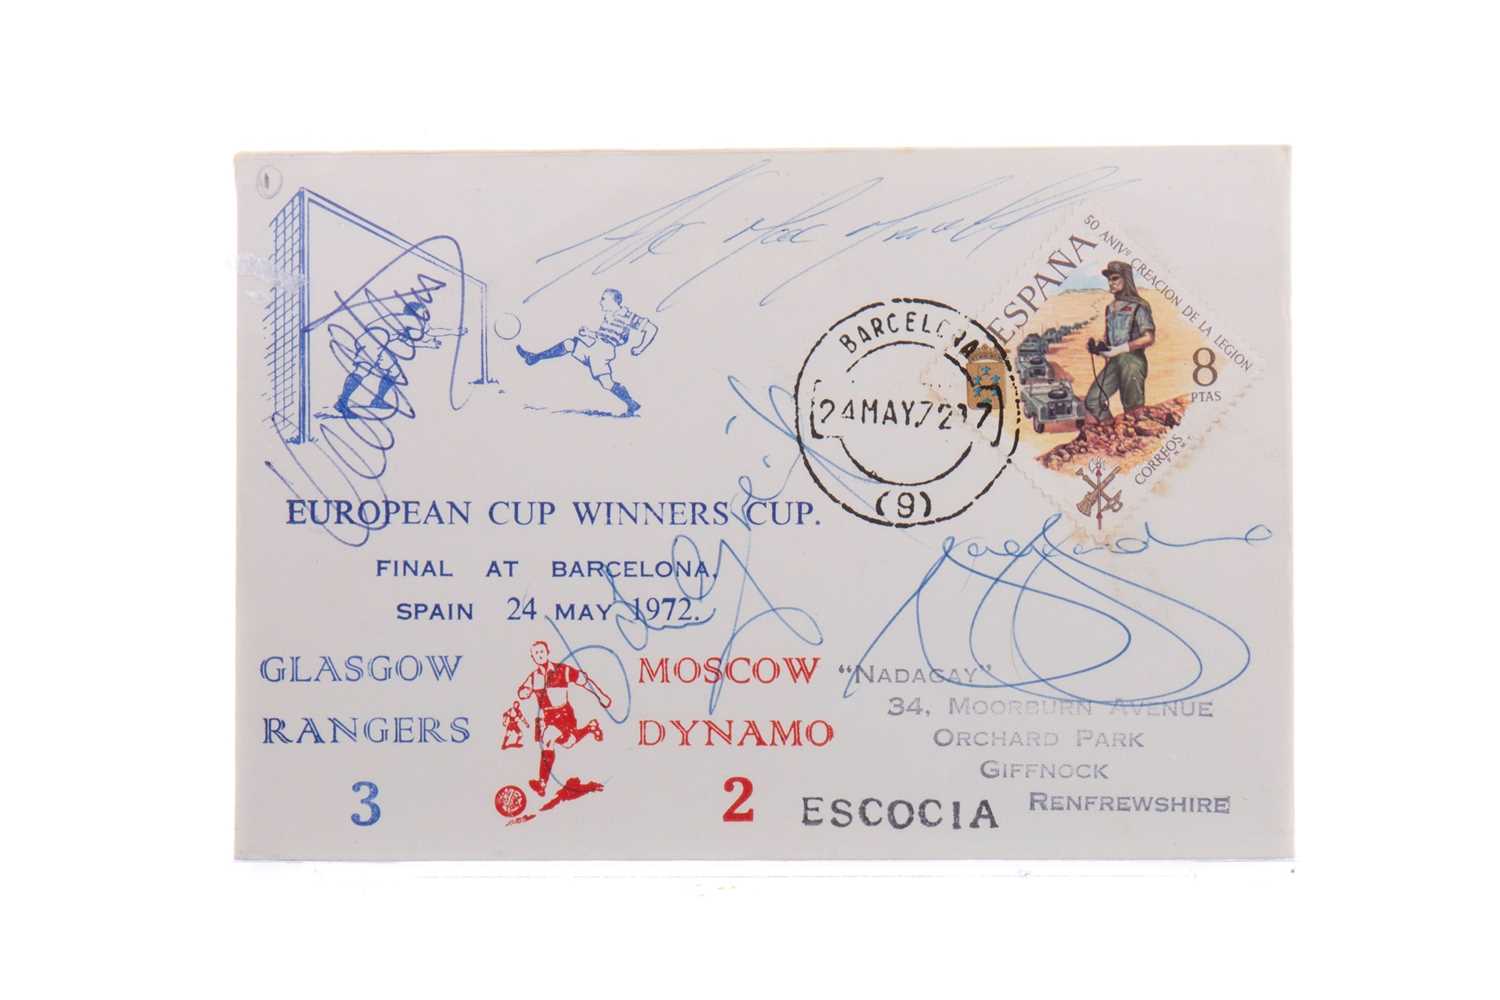 Lot 1556 - RANGERS F.C. INTEREST - SIGNED EUROPEAN CUP WINNERS CUP 1972 COVER